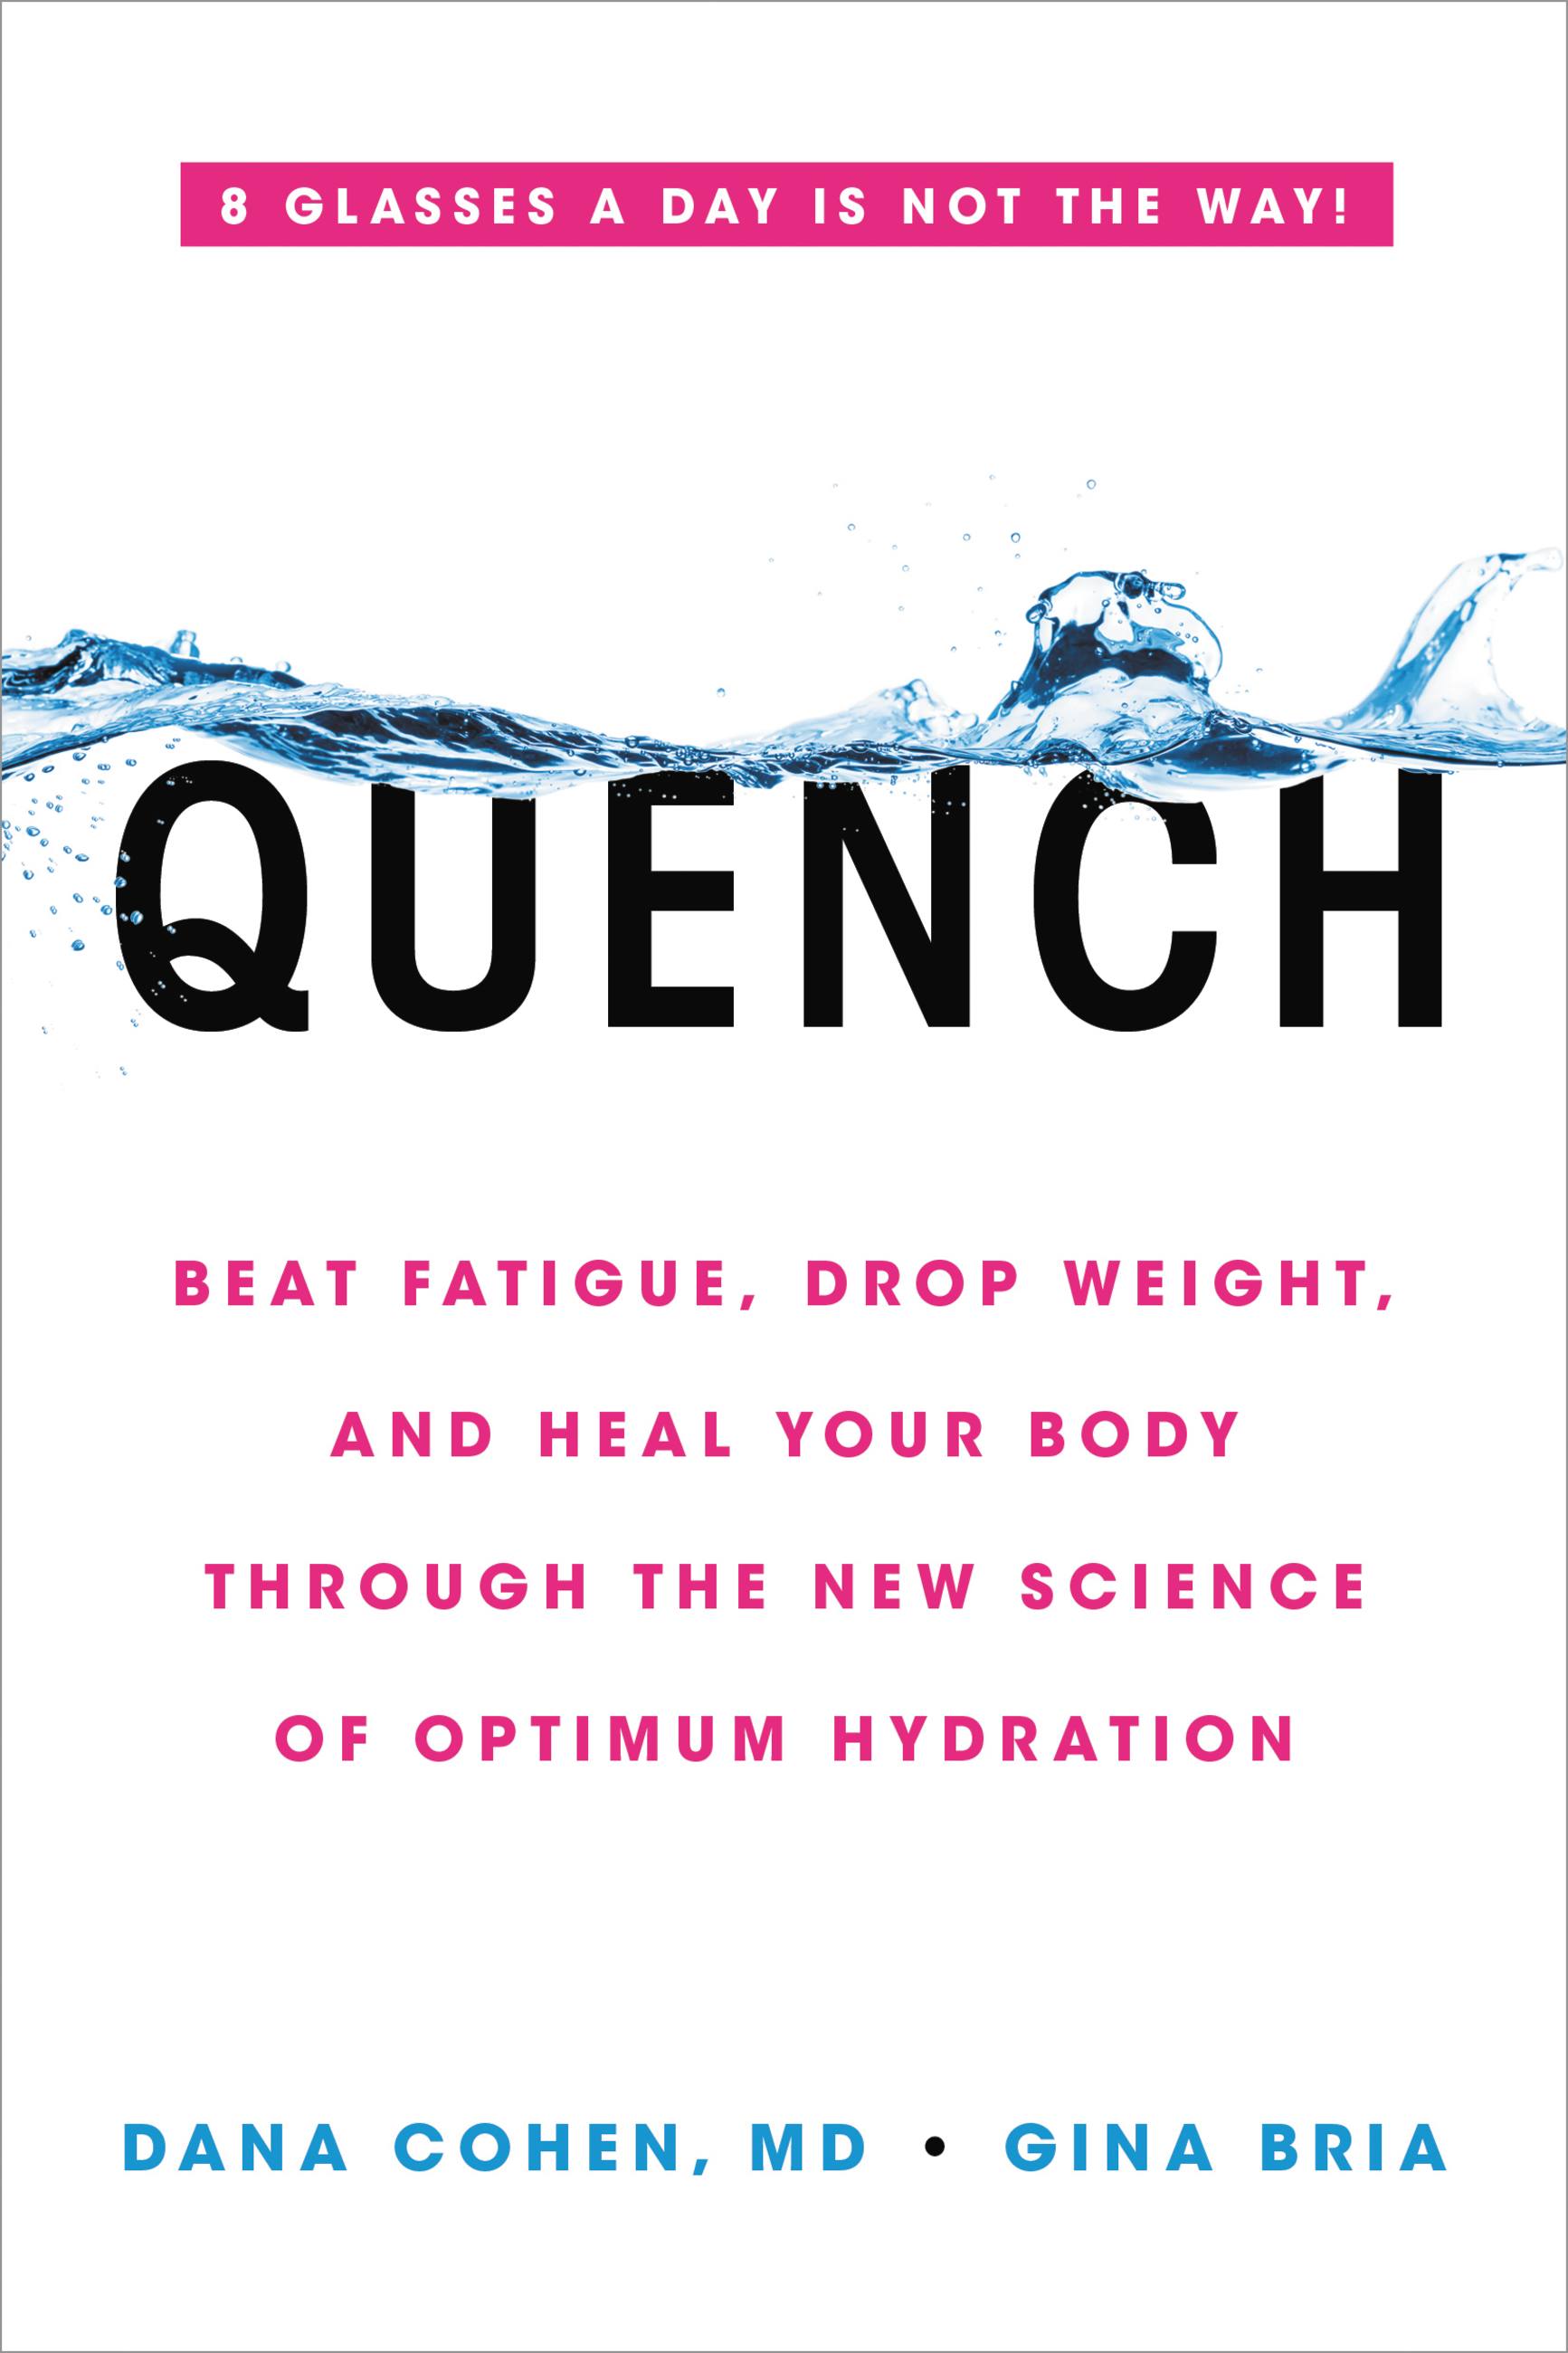 Quench Book by Dr. Dana Cohen, MD and Gina Bria